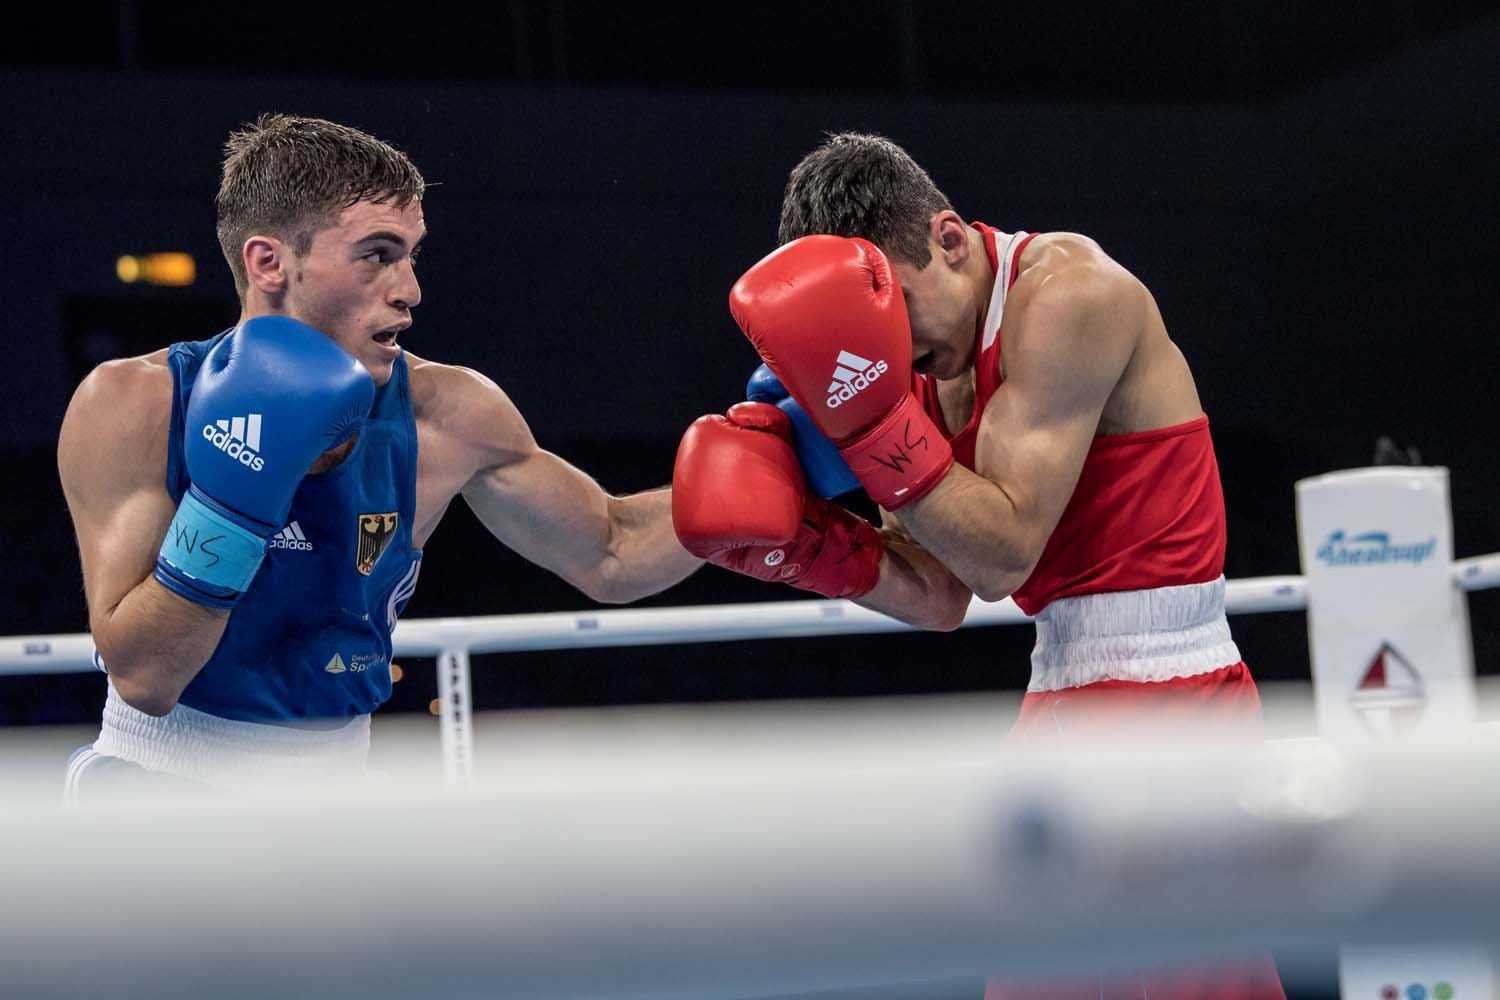 Lightweight Murat Yildirim delighted the home crowd with victory over Russia's Gabil Mamedov ©AIBA